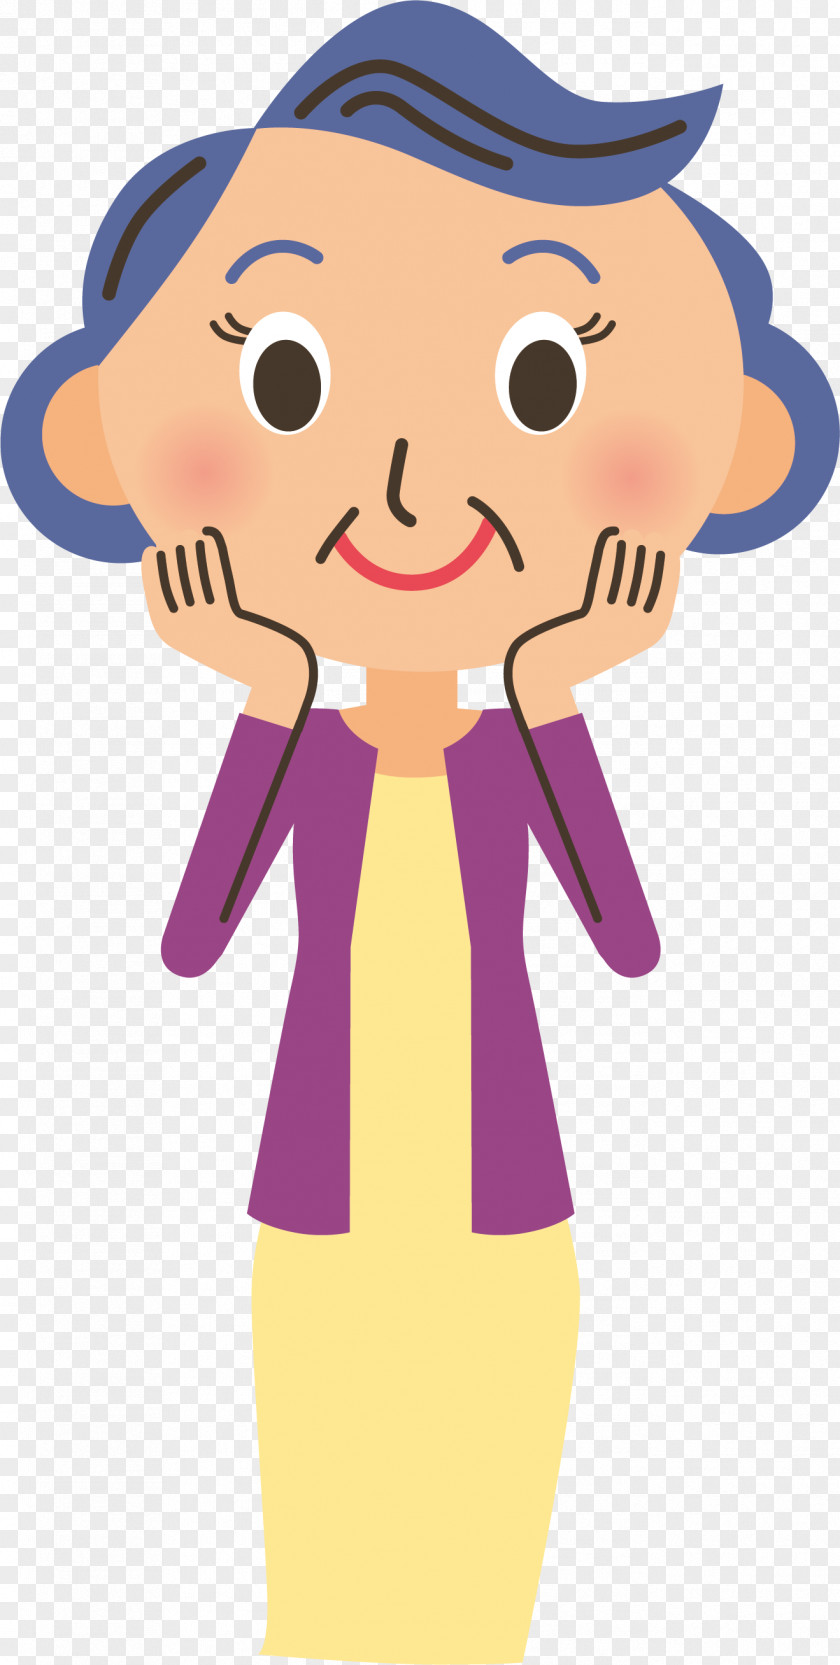 Curly Granny Vector Euclidean Illustration PNG